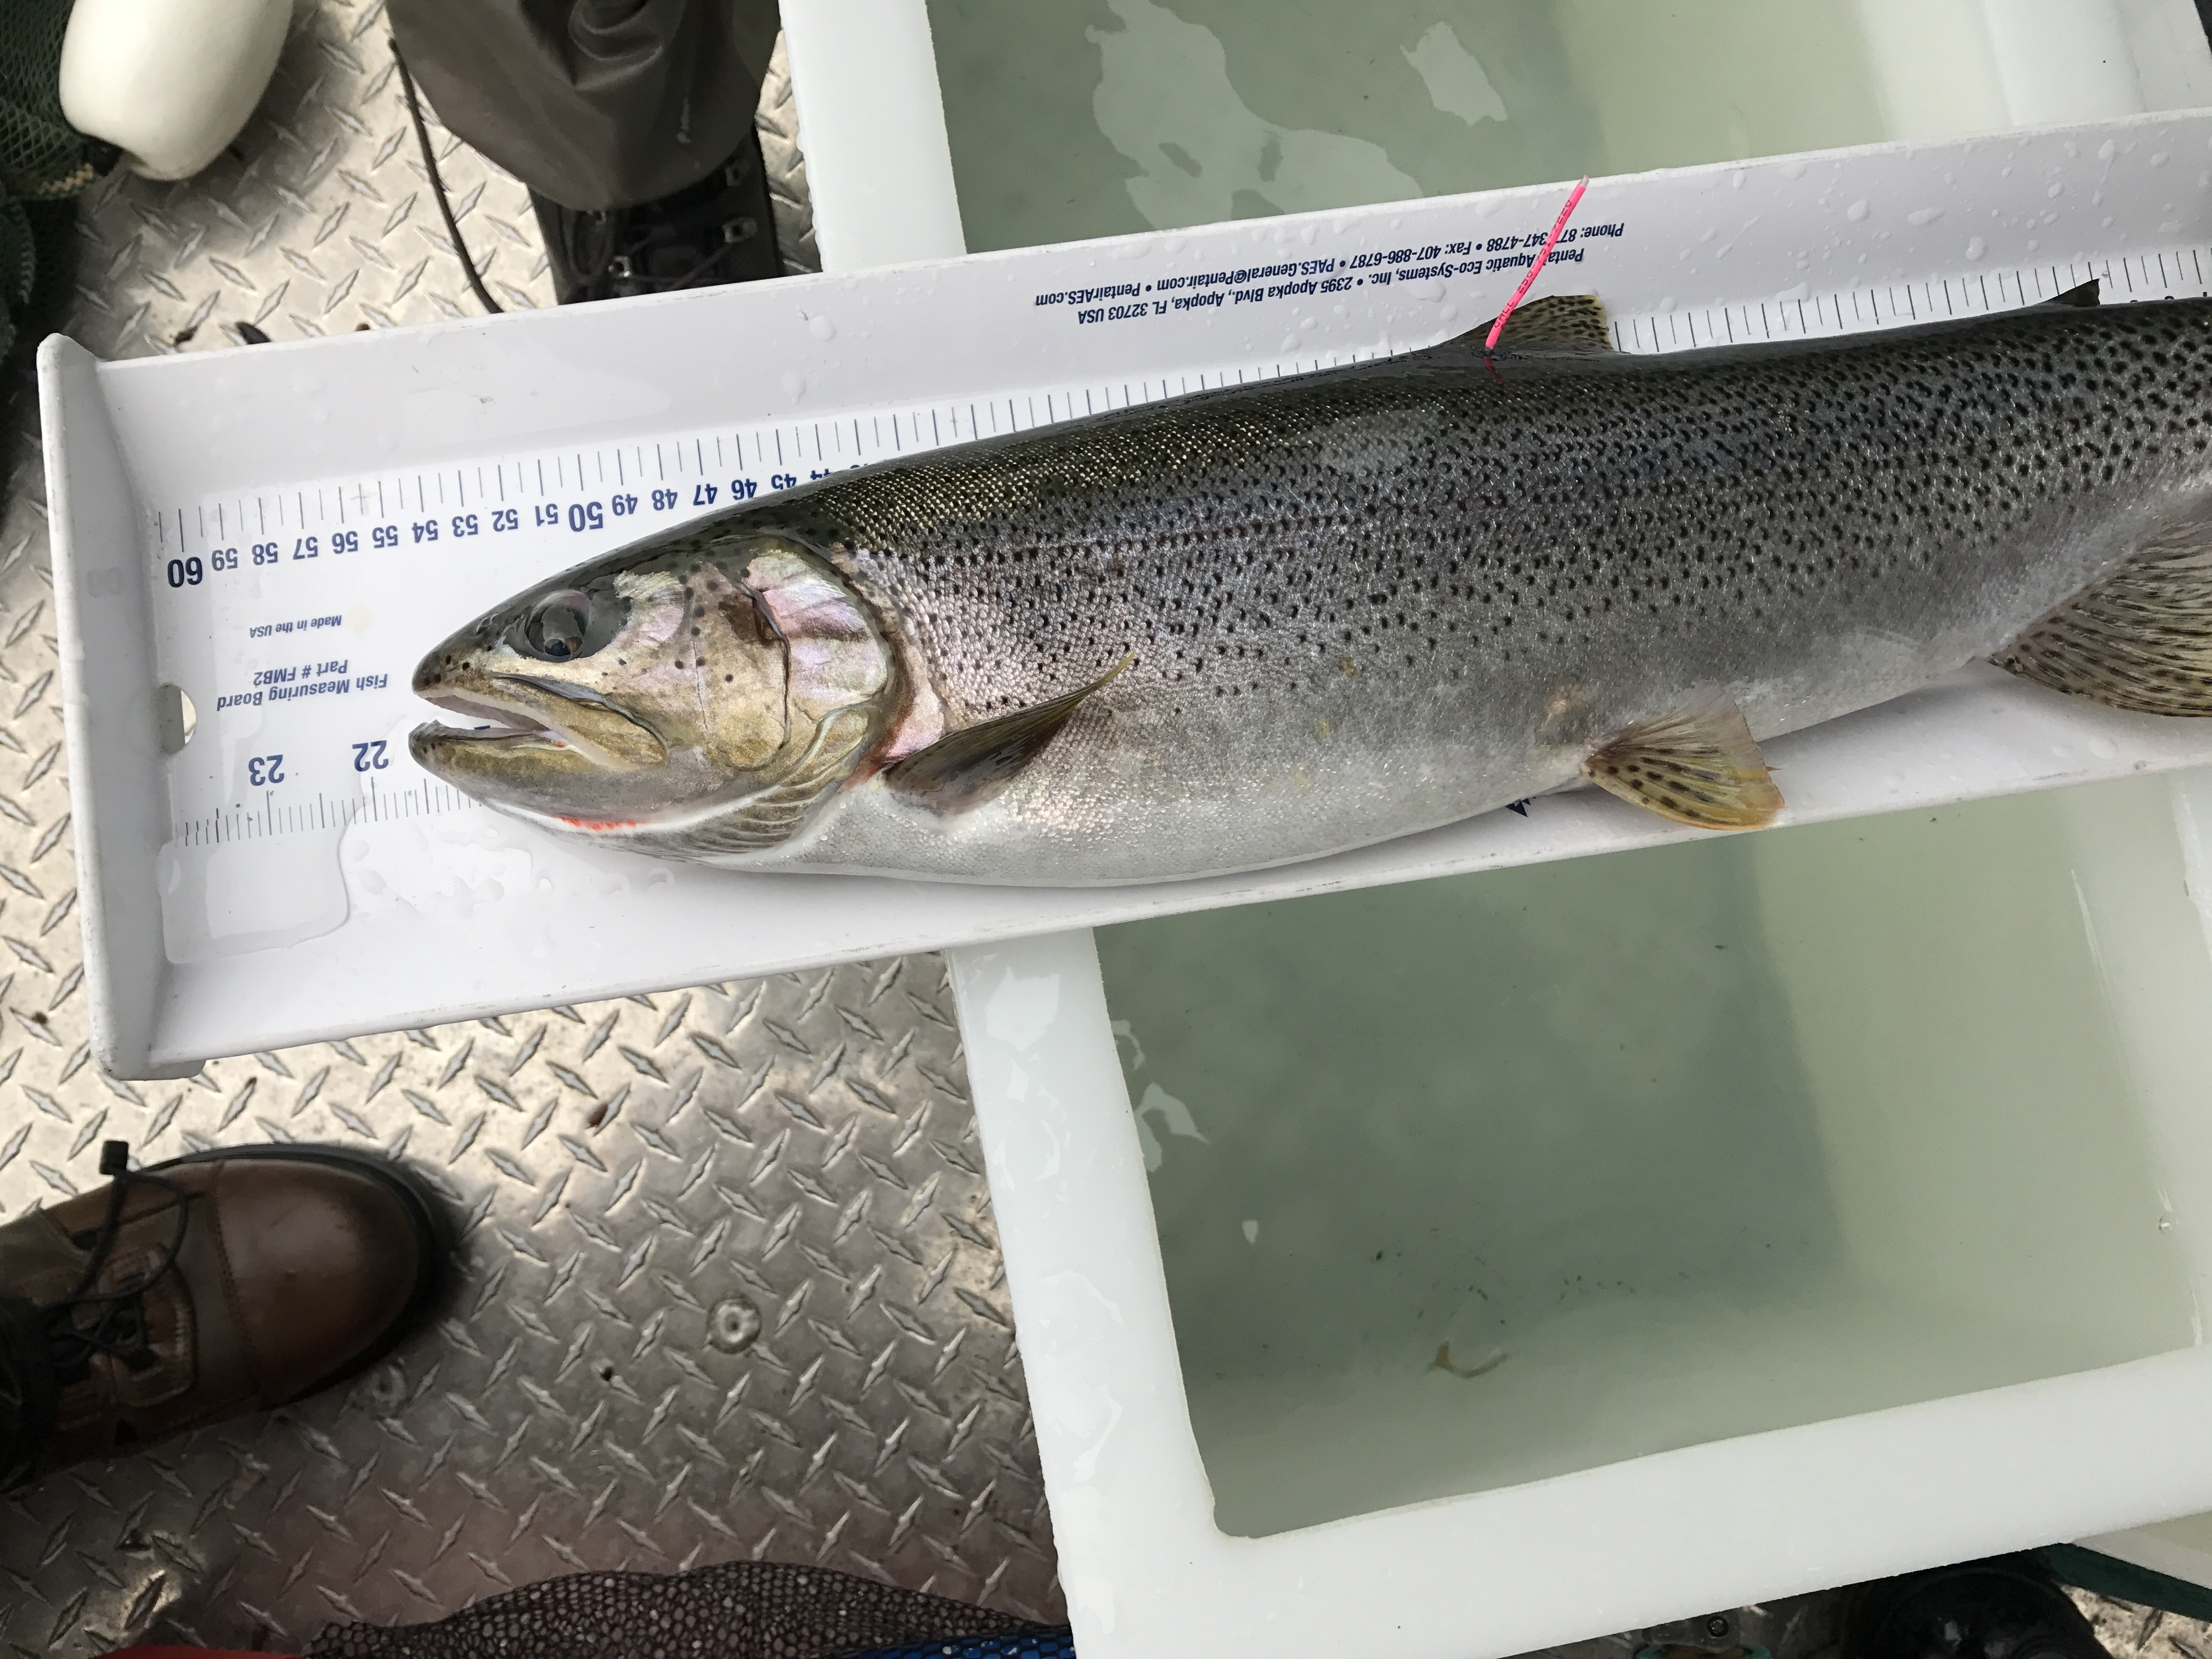 Anglers at Horne Lake can receive rewards for catching tagged